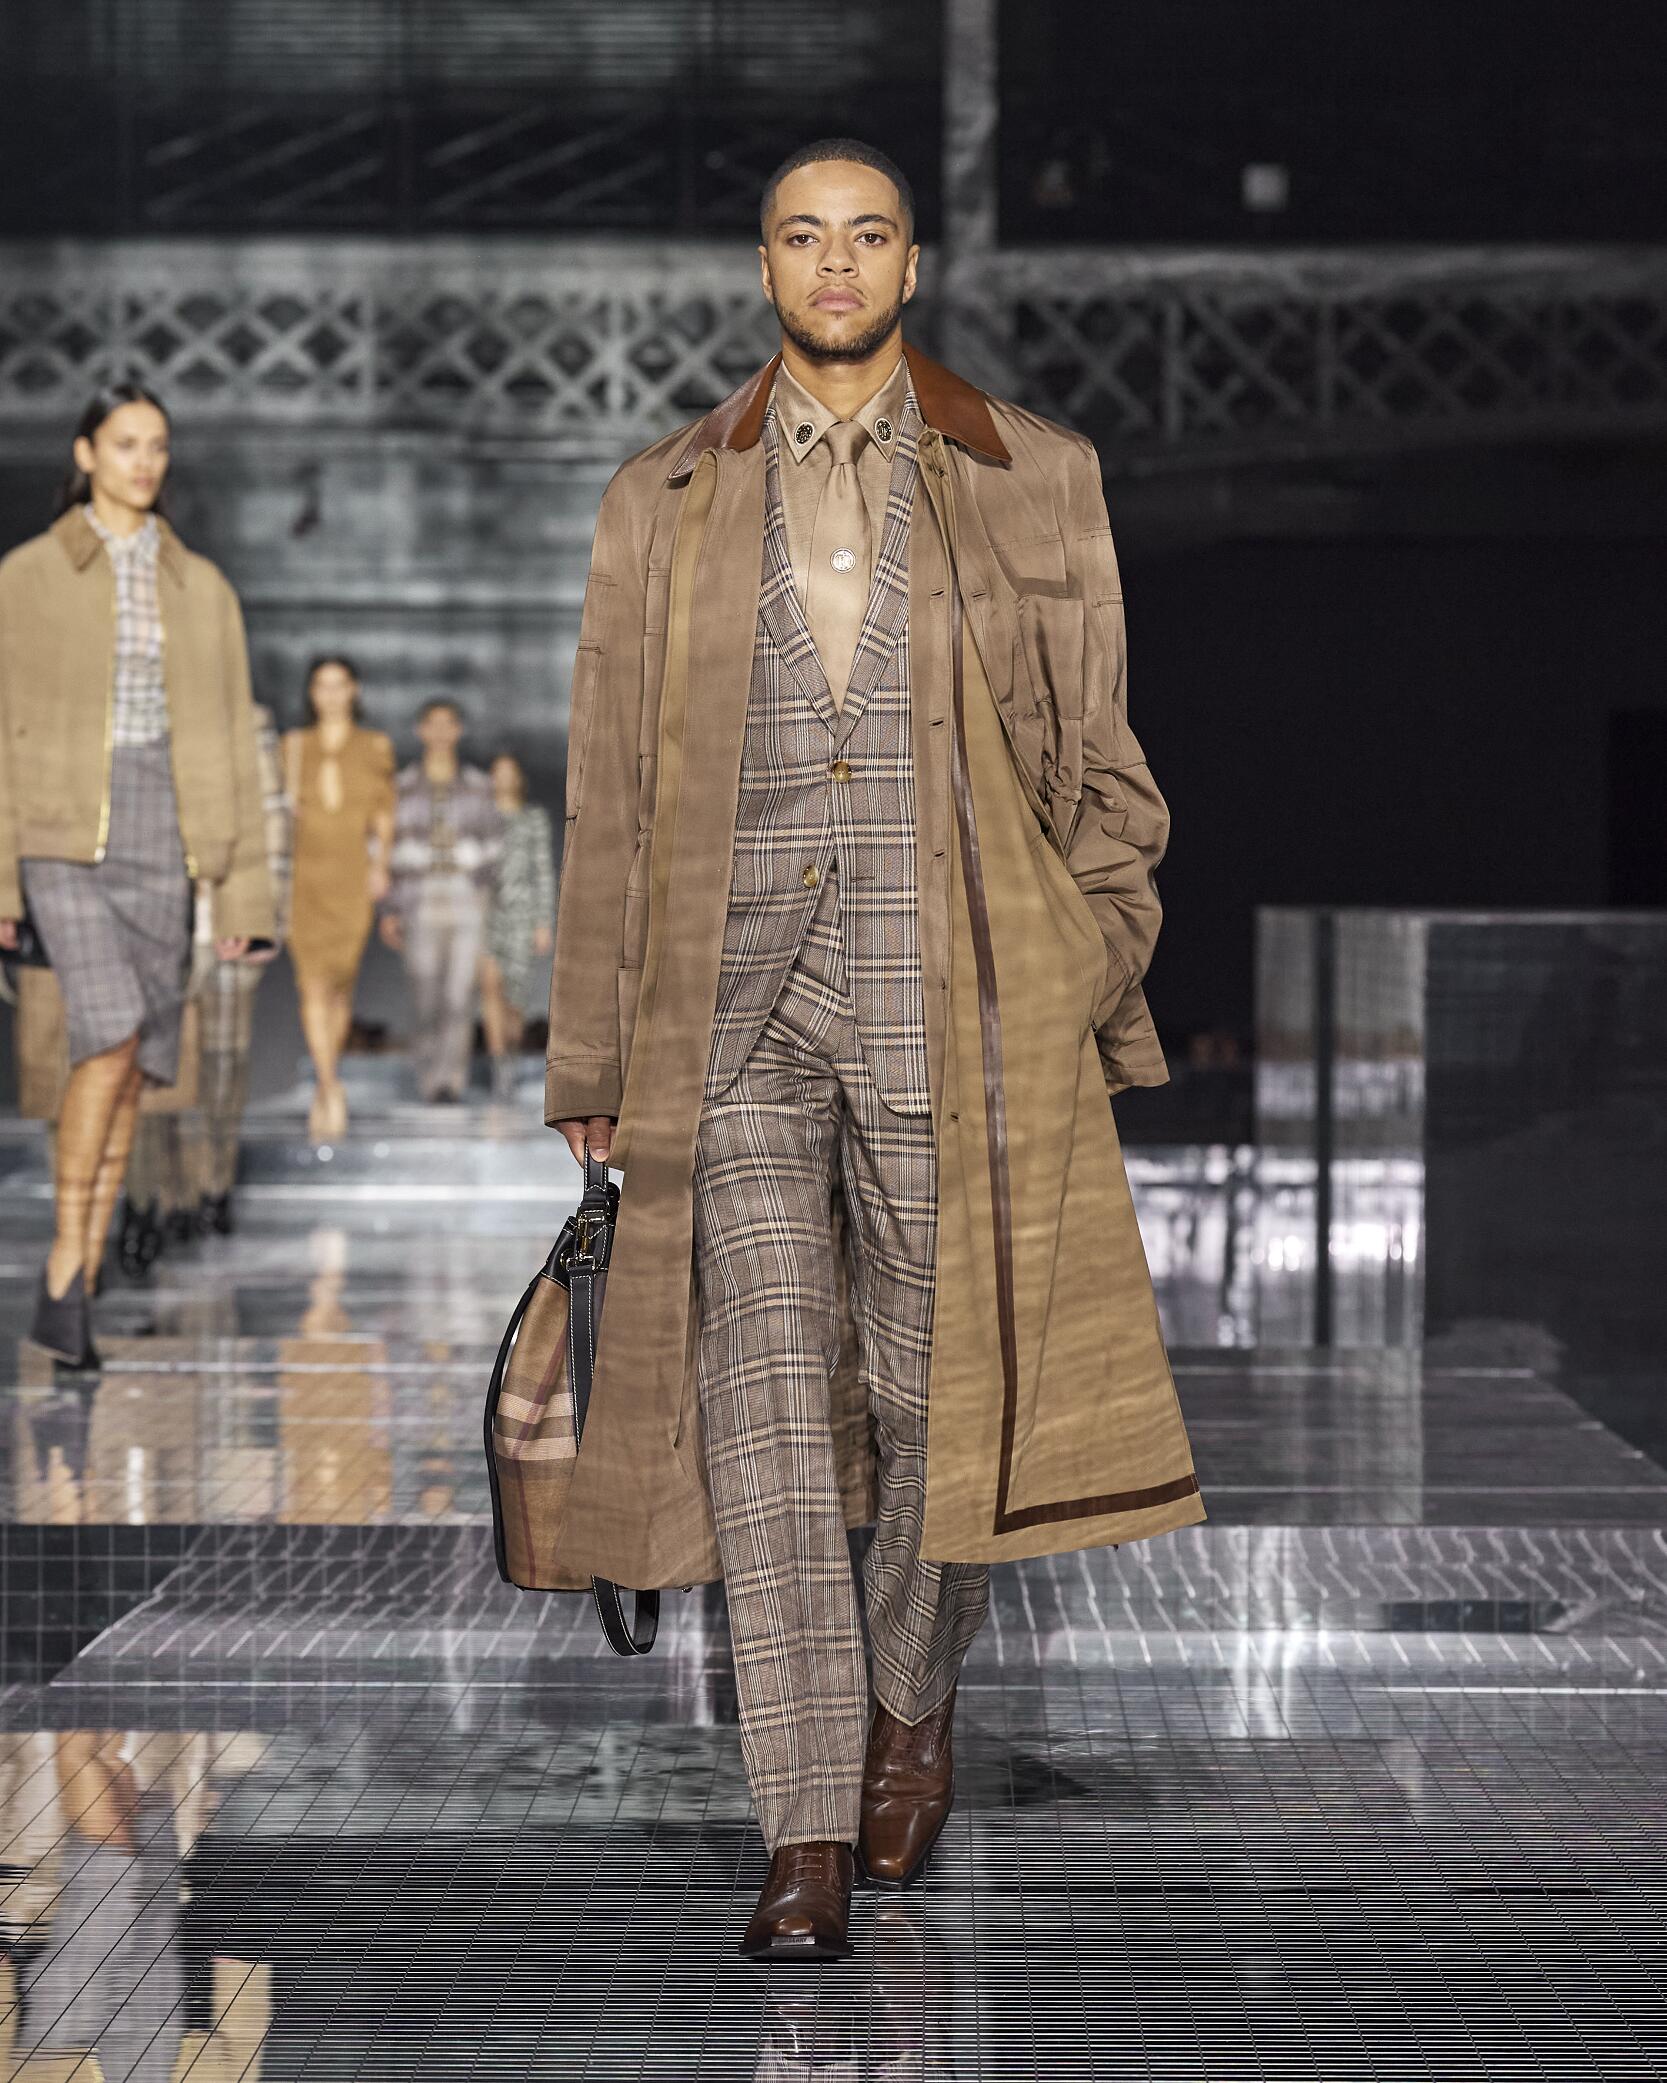 BURBERRY FALL WINTER 2020 COLLECTION | The Skinny Beep